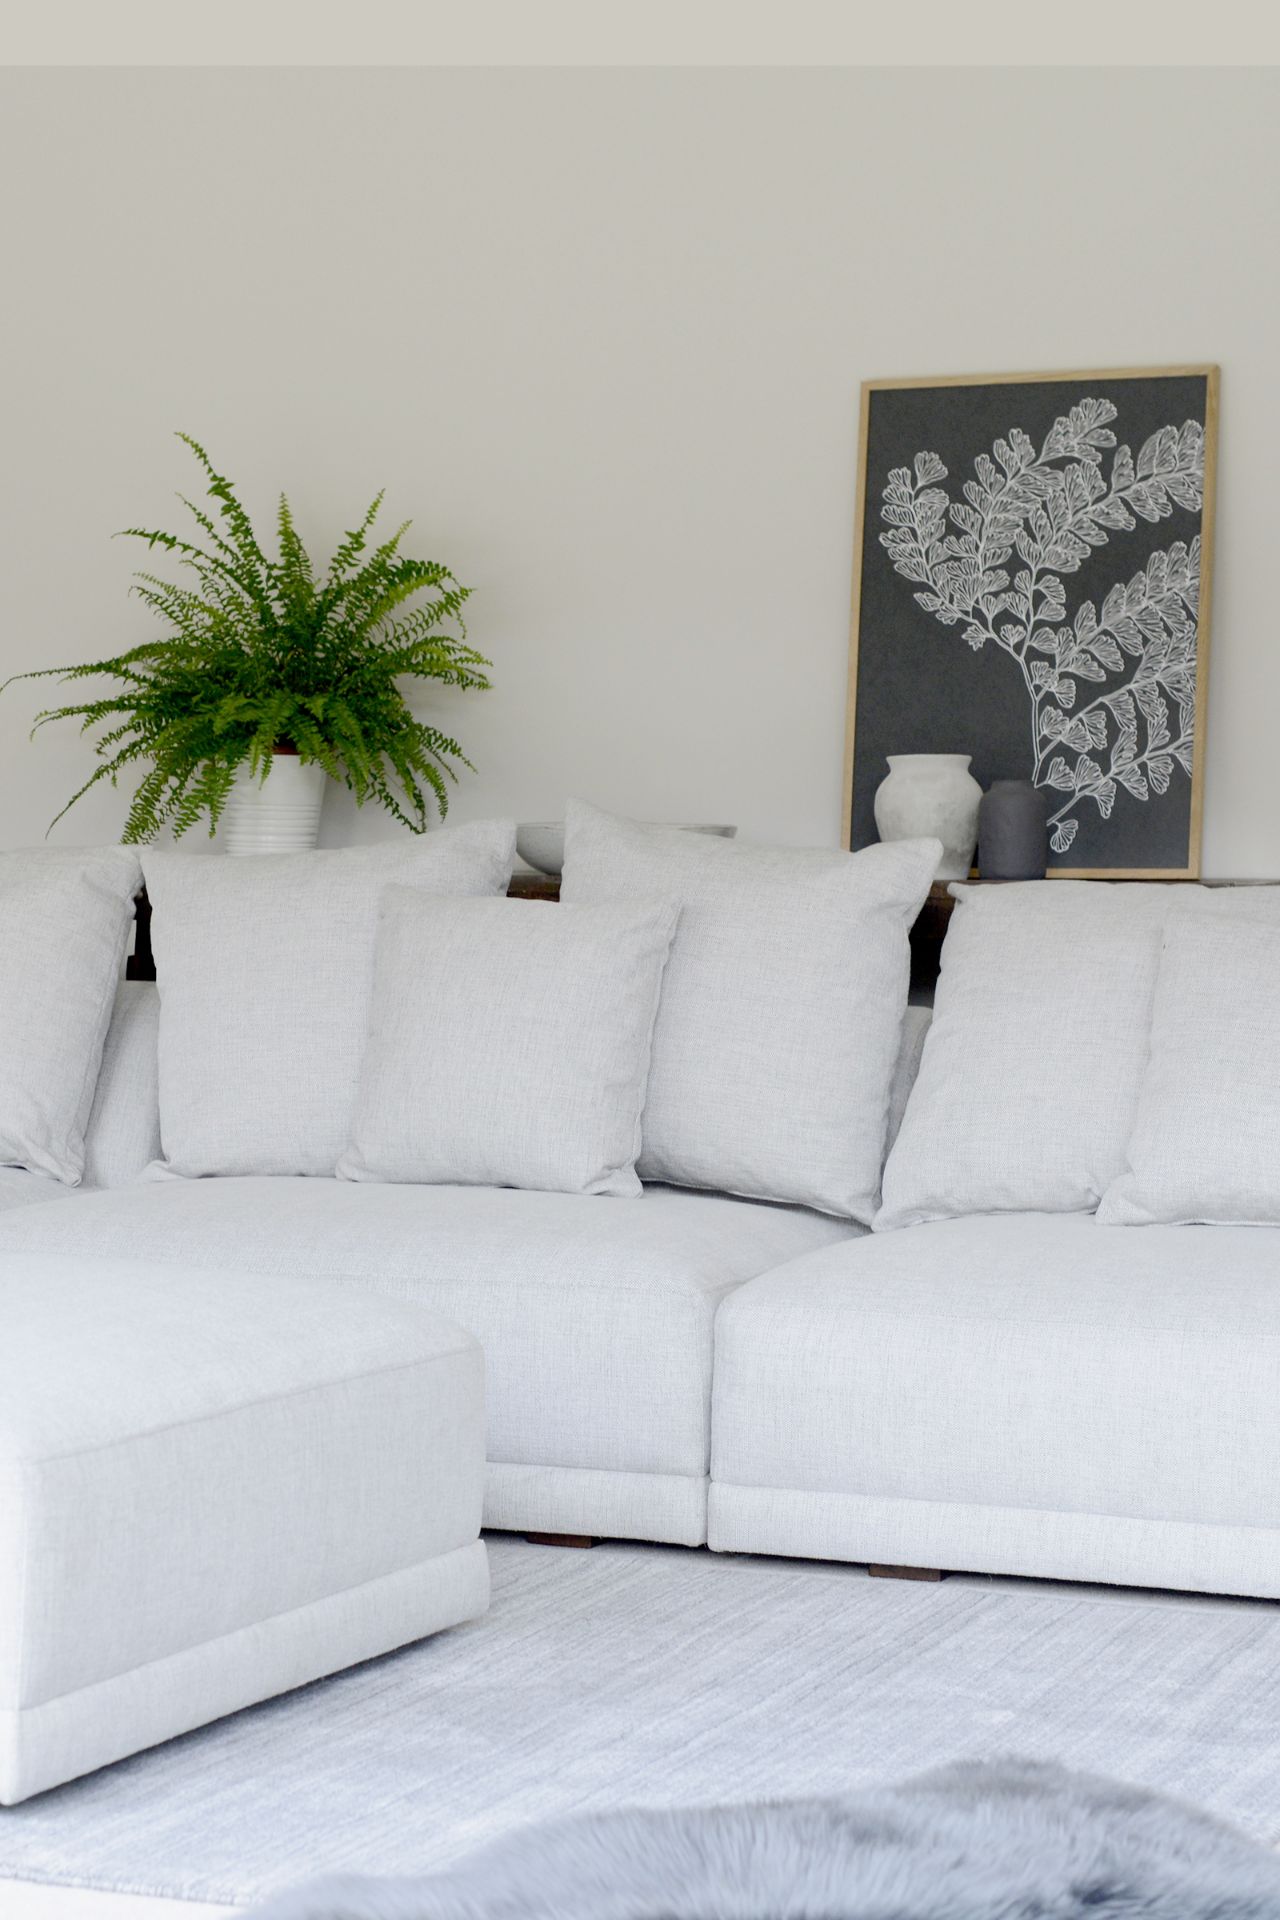 4 Piece Sectional Sofa Set - White: This modular sofa features unmatched comfort and style. - Image 2 of 2